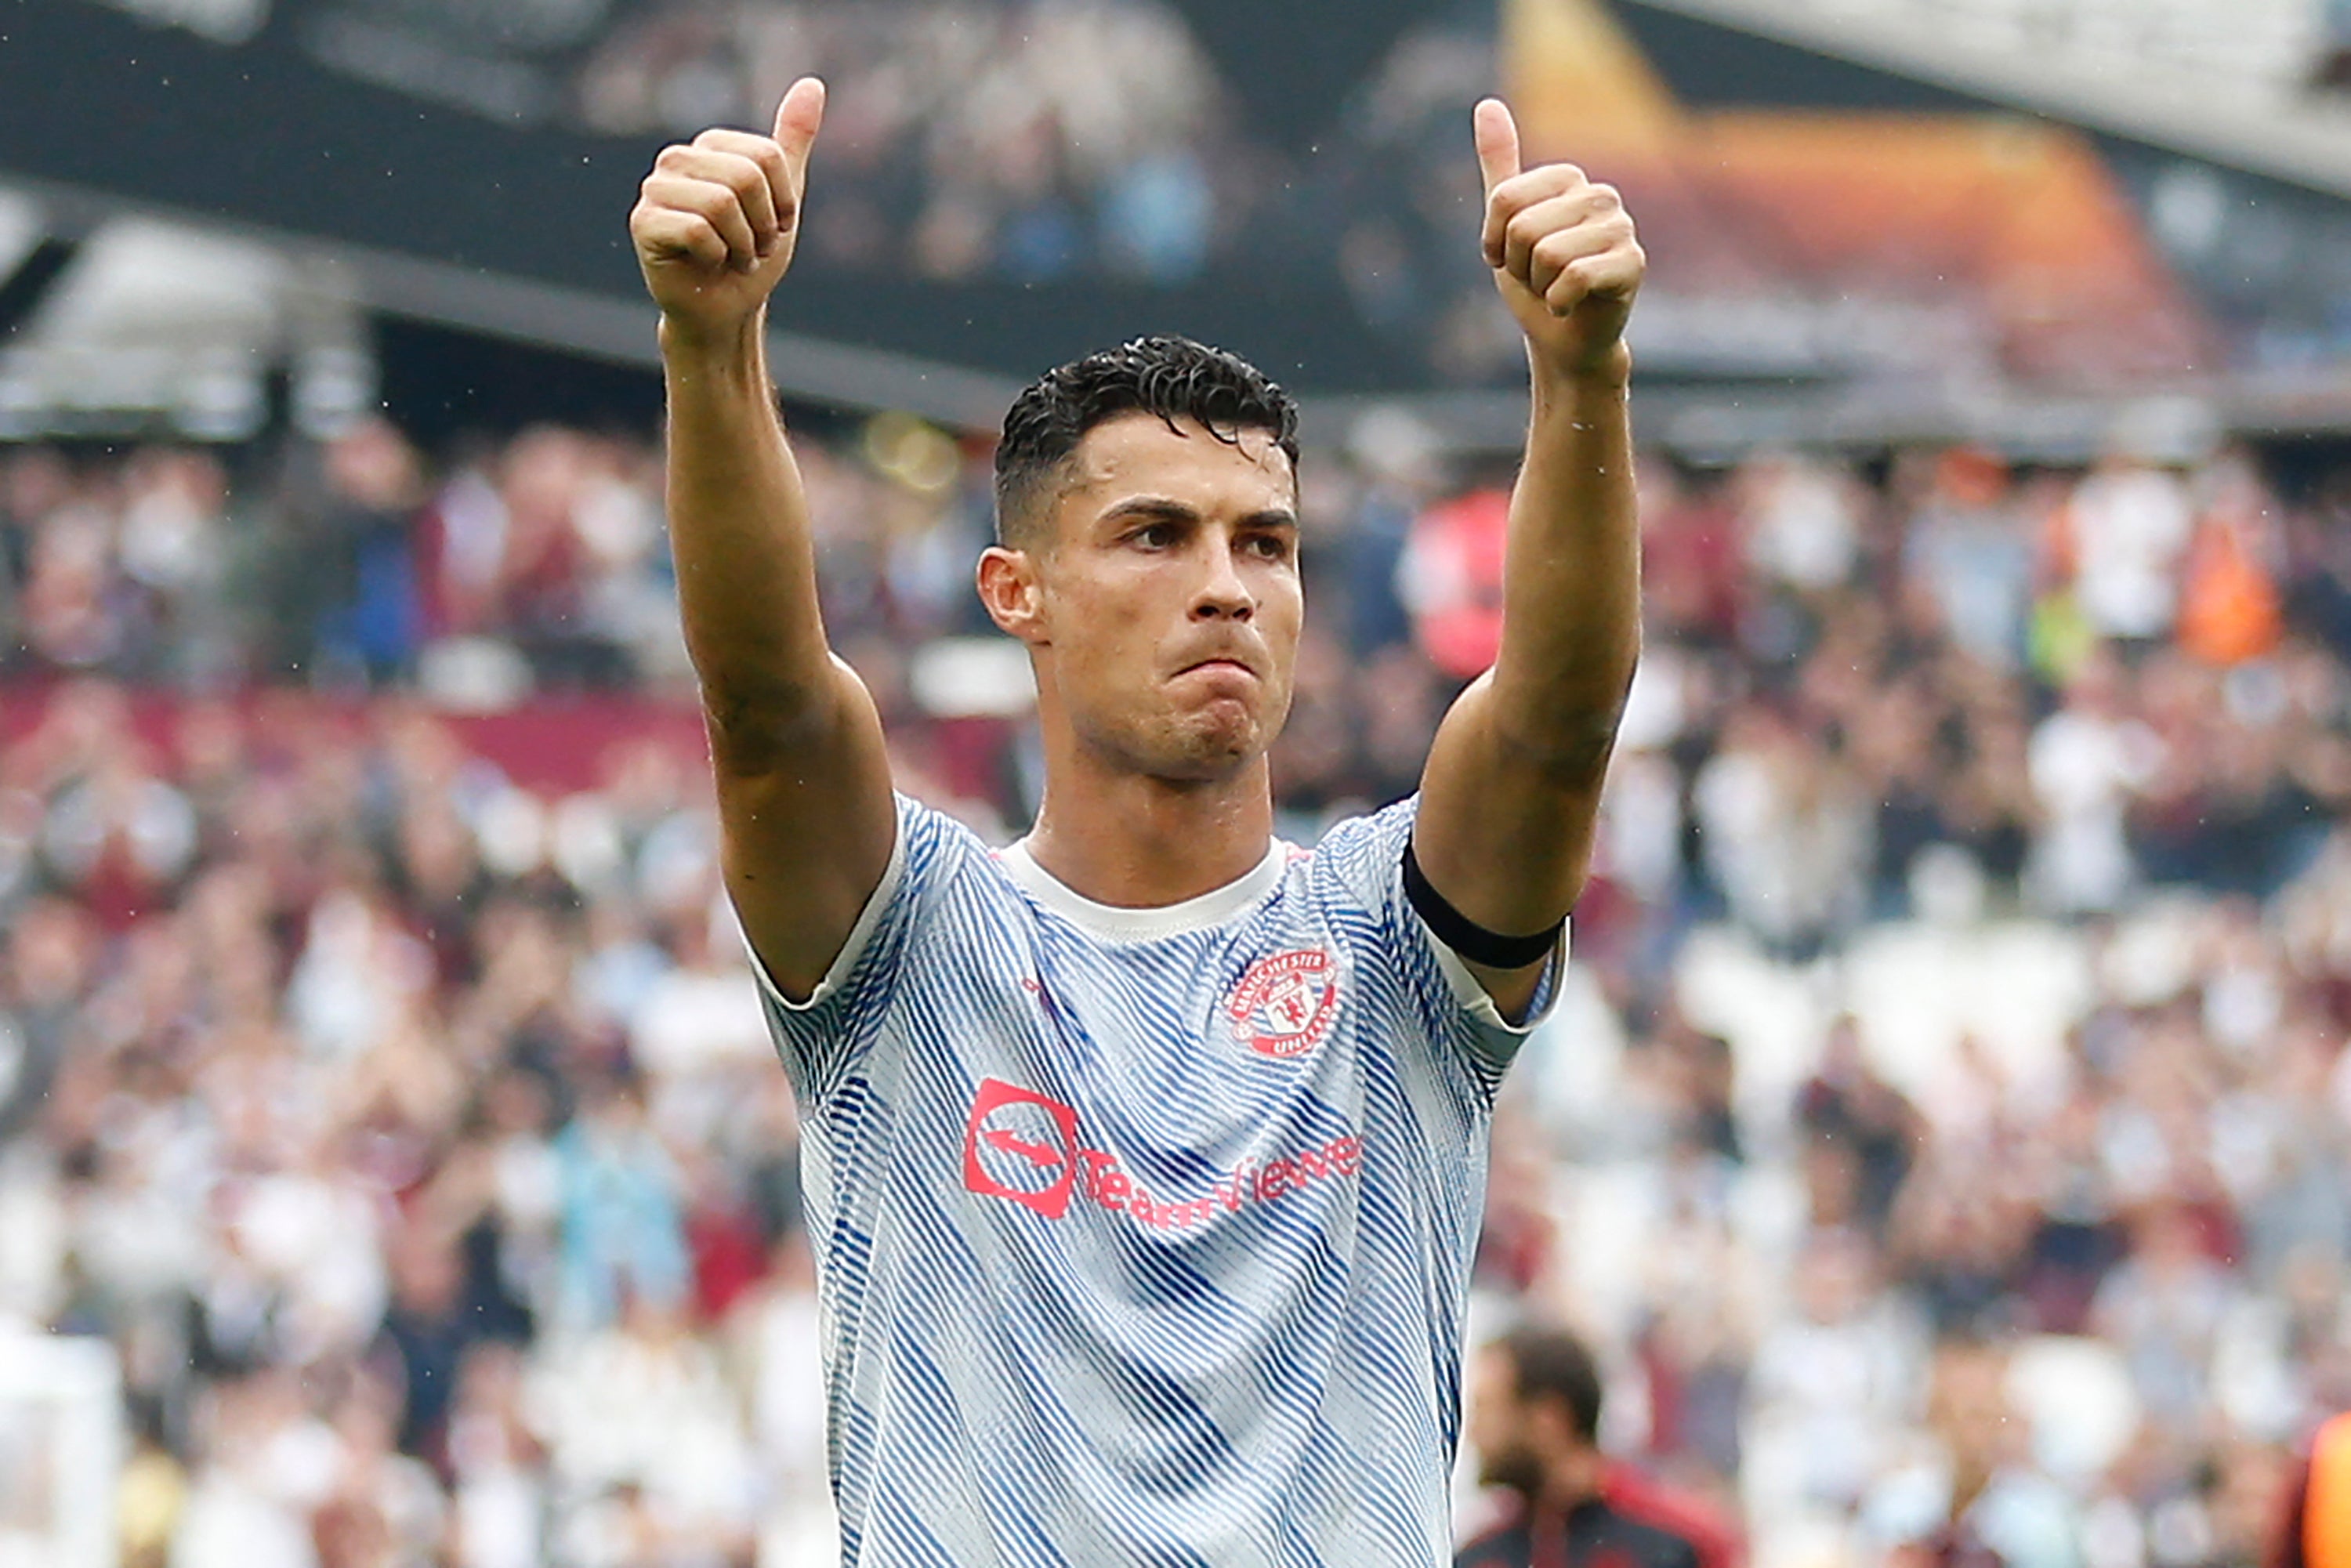 Cristiano Ronaldo scored for the third game in a row in the 2-1 win at West Ham